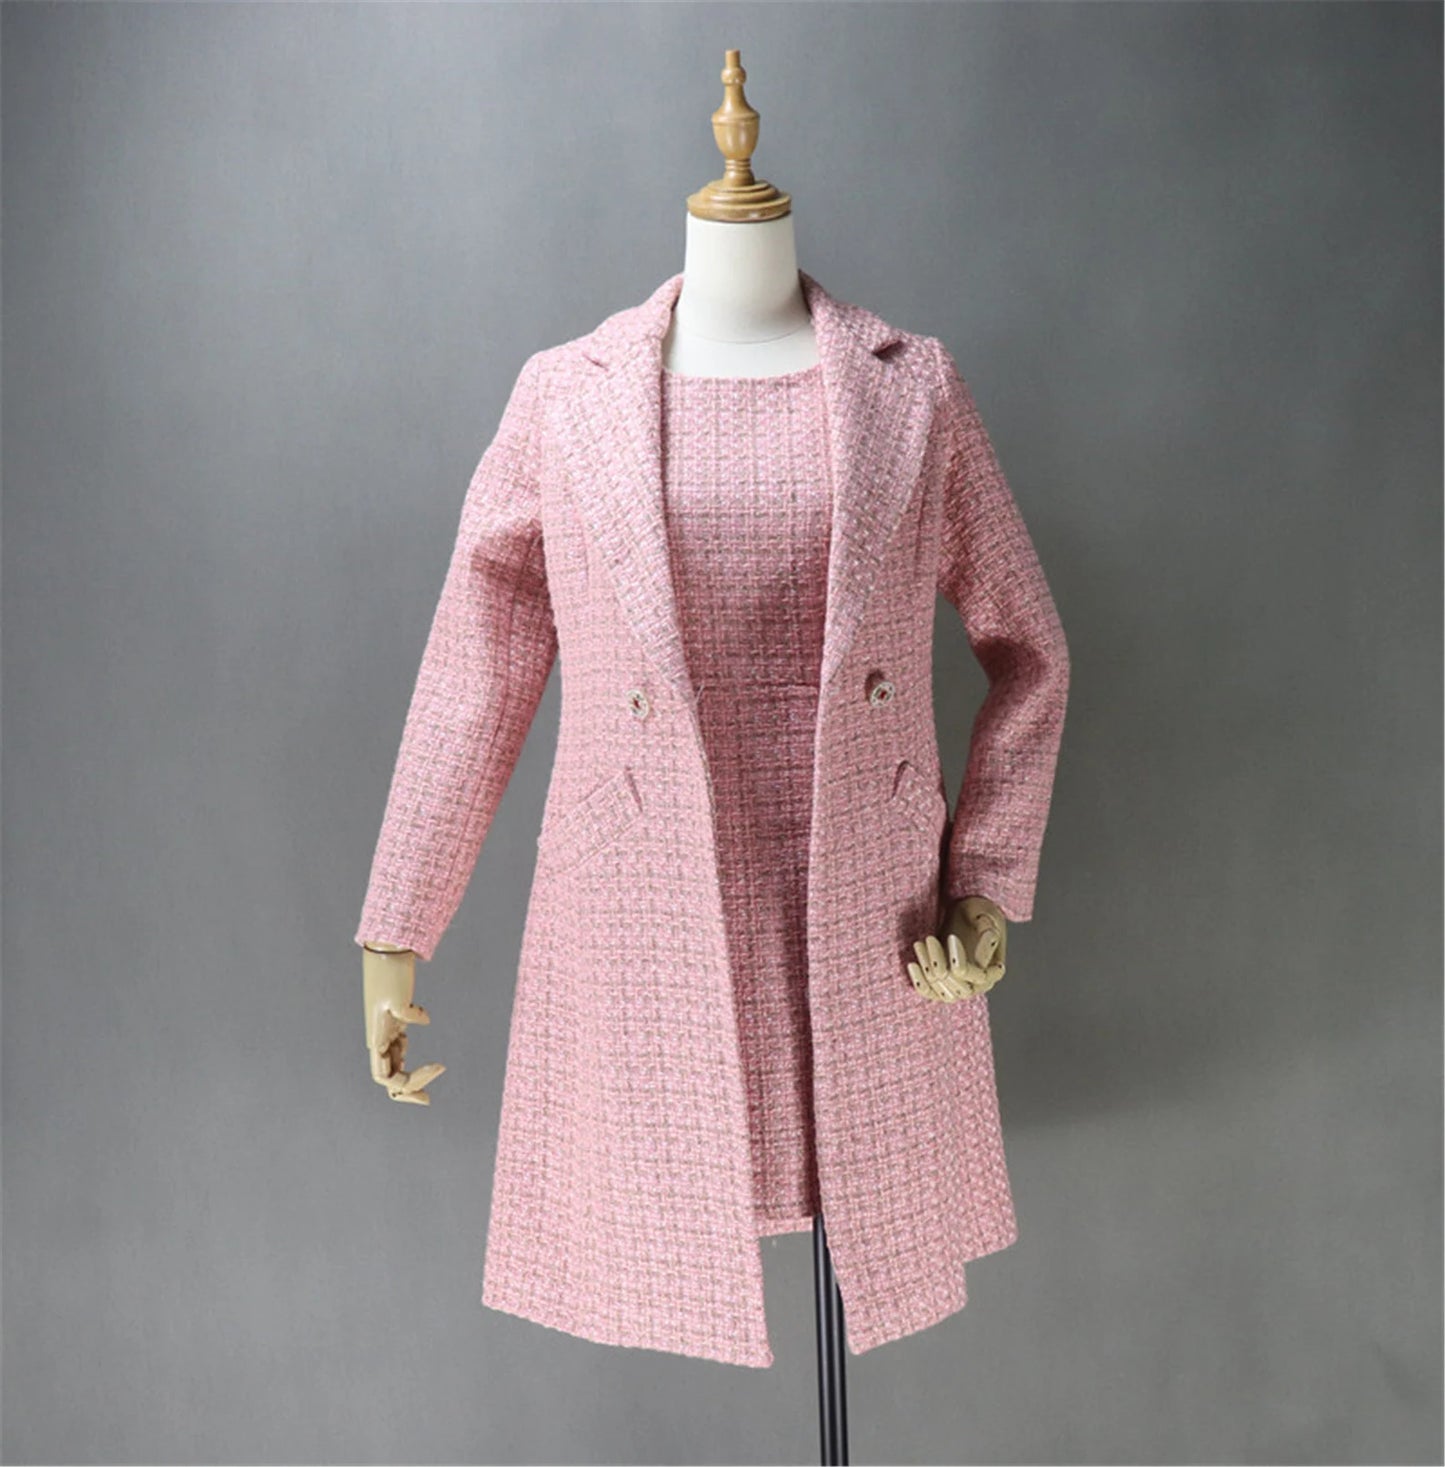 Sheath Dress  + Long Coat For Ladies With Tweed material(10% discount)  "More Than 10% Additional Discount when you buy both  Jacket  +Sheath Dress  UK CUSTOMER SERVICE! Women Custom  Hand Made Pink Tweed Blazer (more than 10% discount) - Whether it's for a wedding, an office interview, graduation, the Inauguration, or a new job, make a lasting impression in a timeless tweed suit.